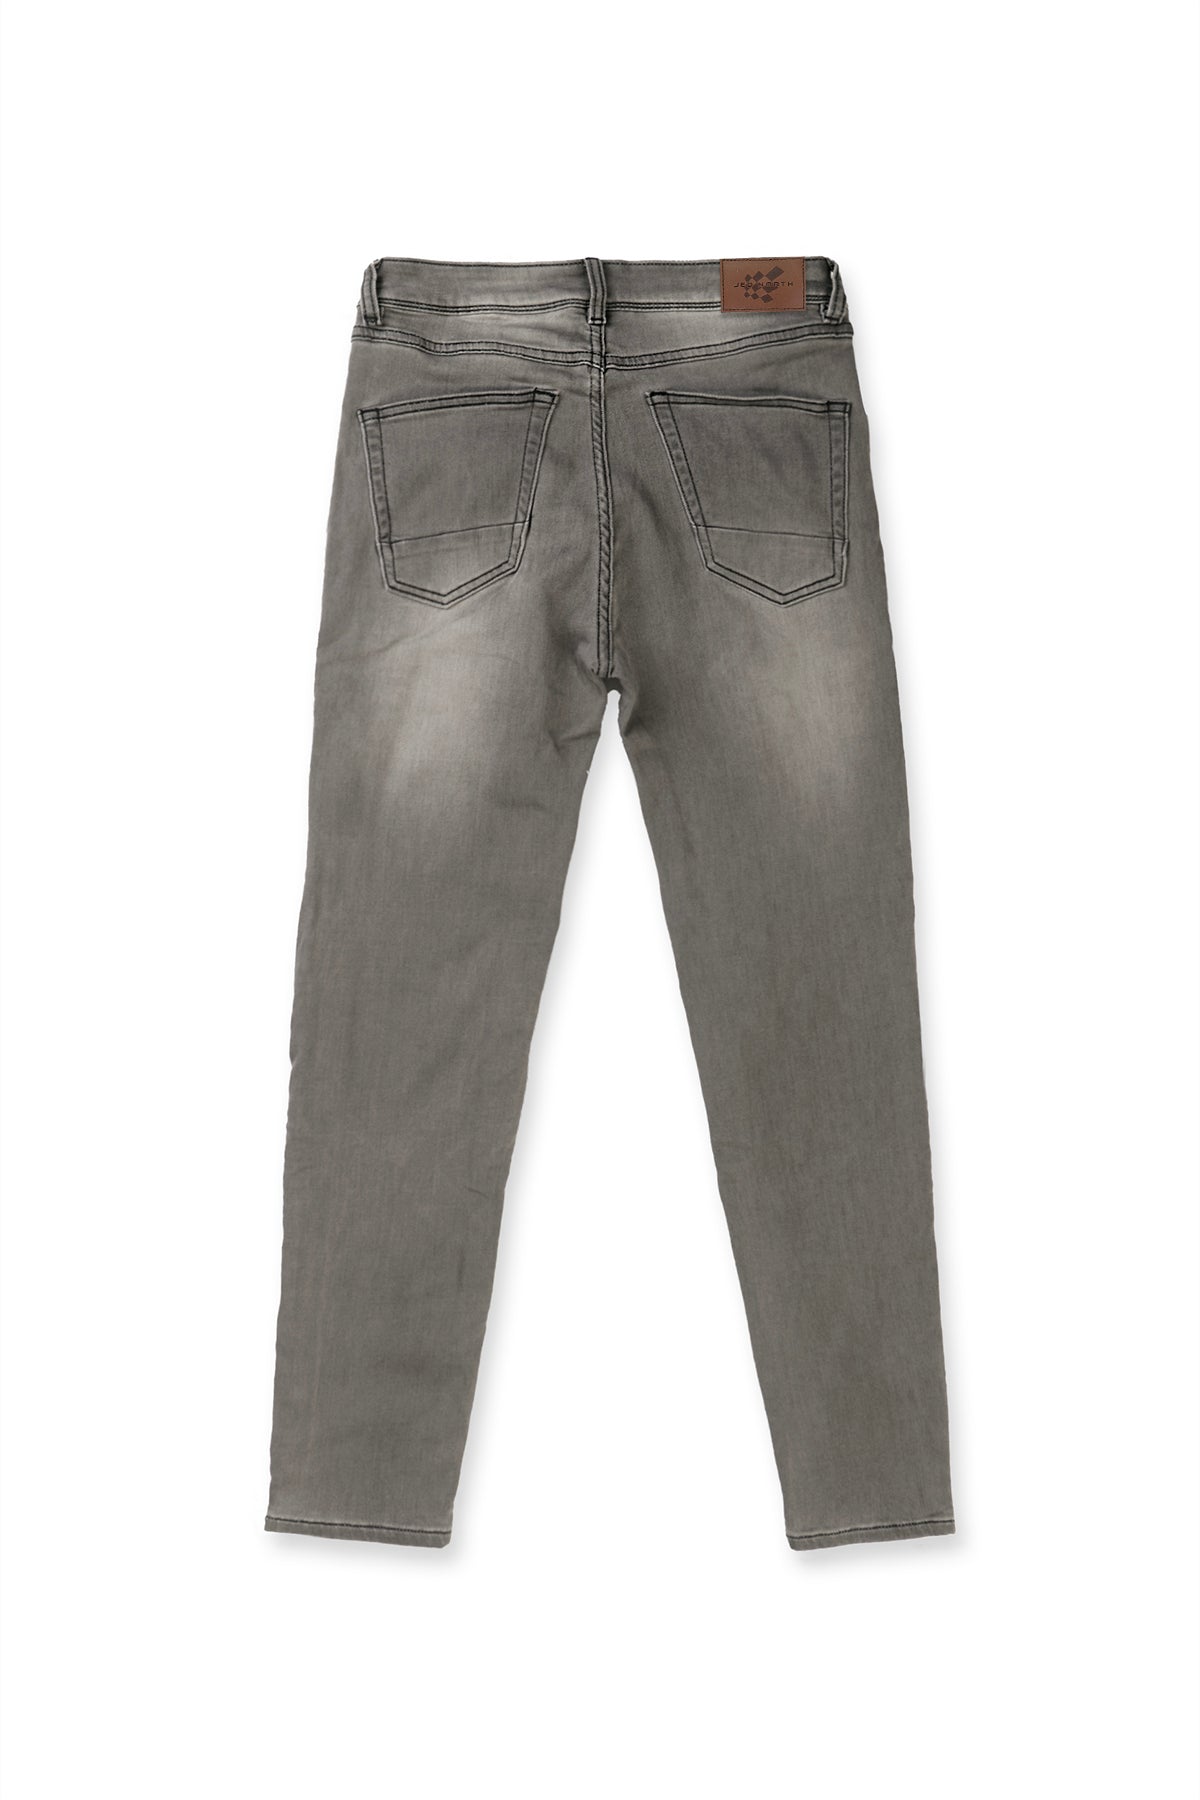 Men's Premium Fitted Stretchy Jeans - Faded Gray